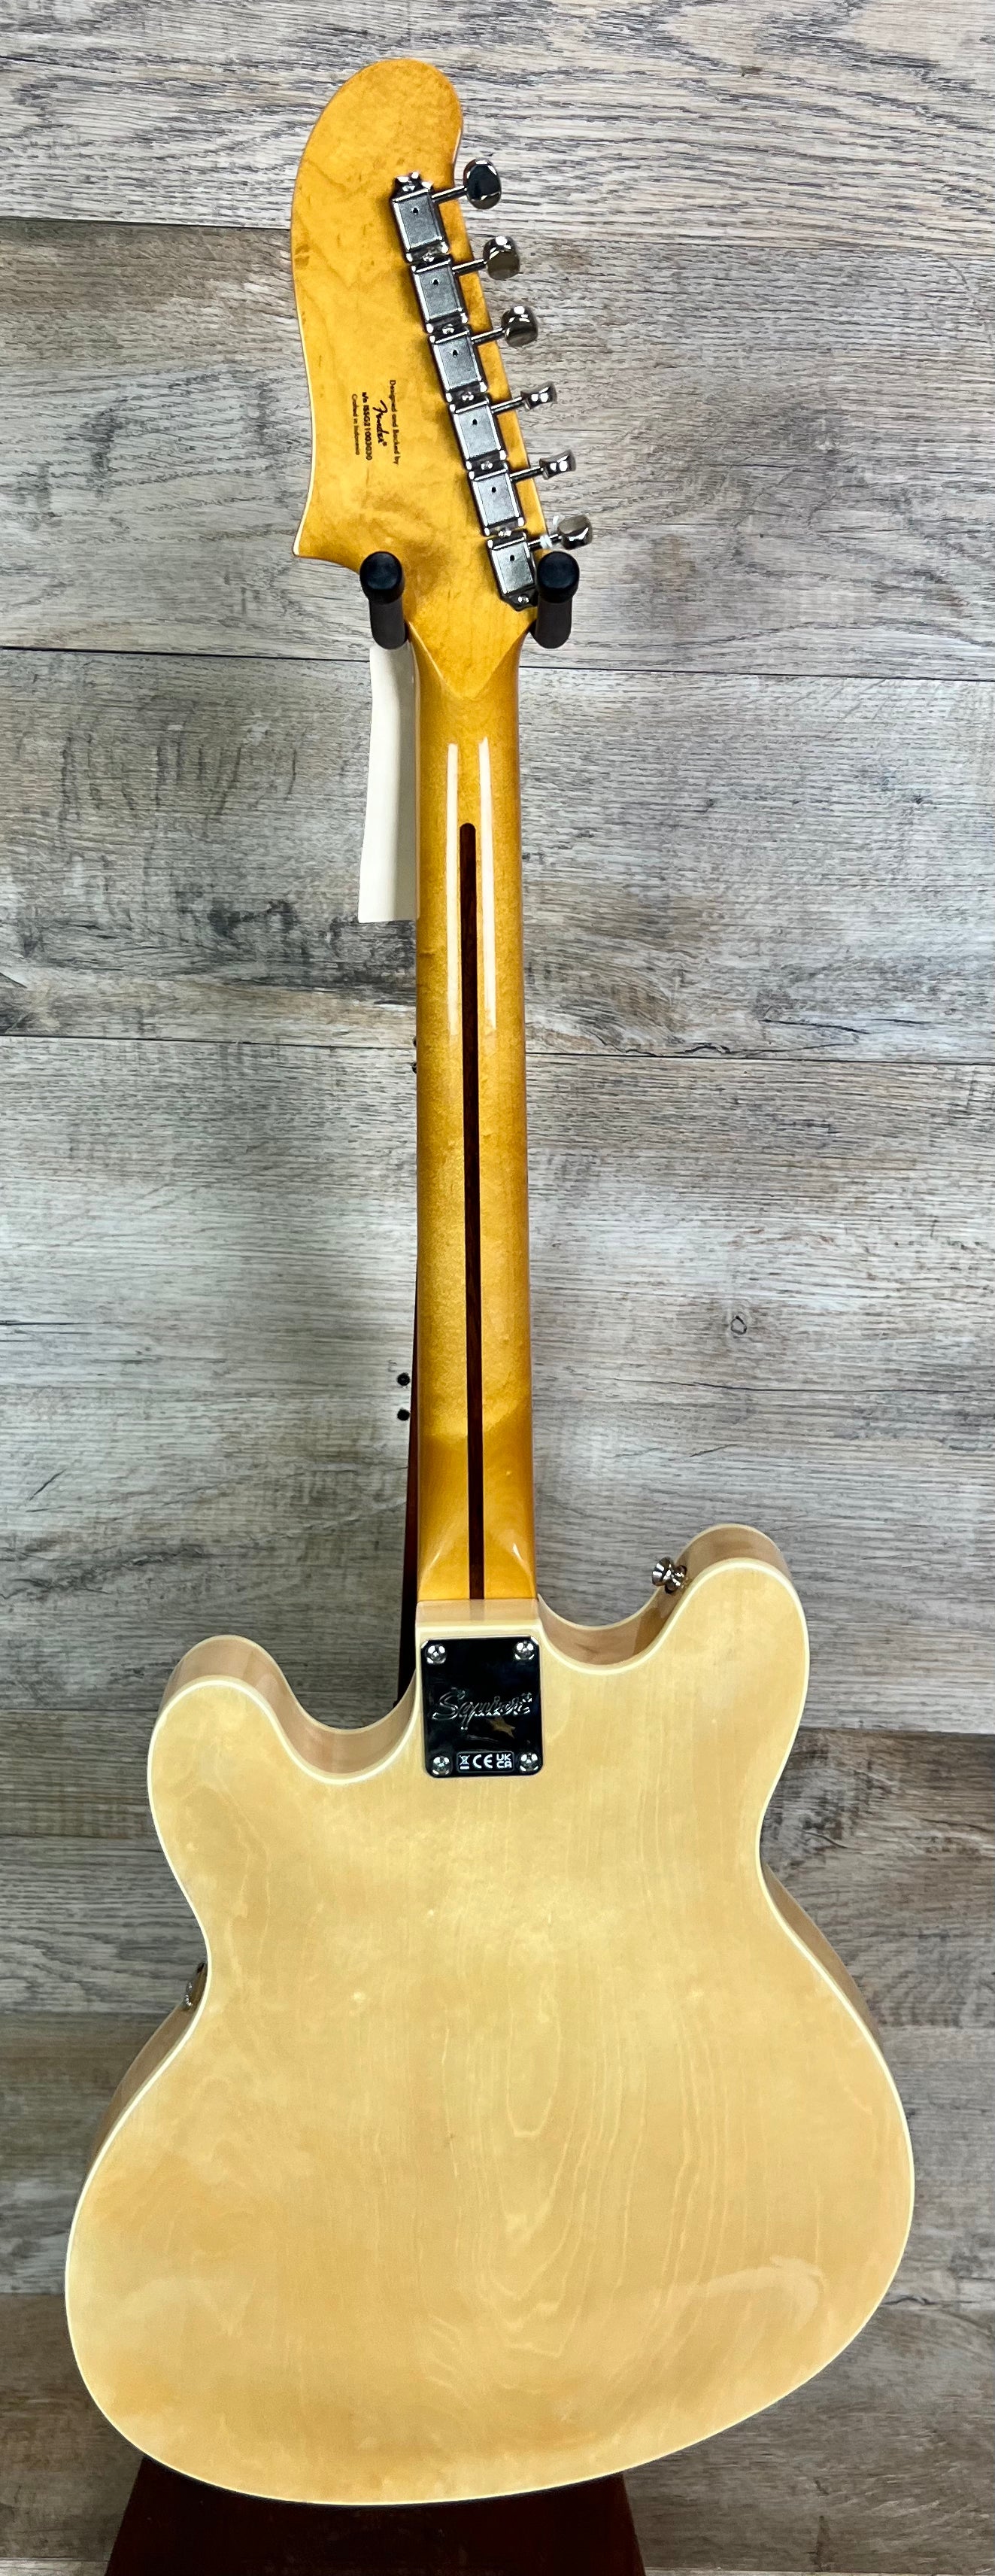 Squier Classic Vibe Starcaster Natural